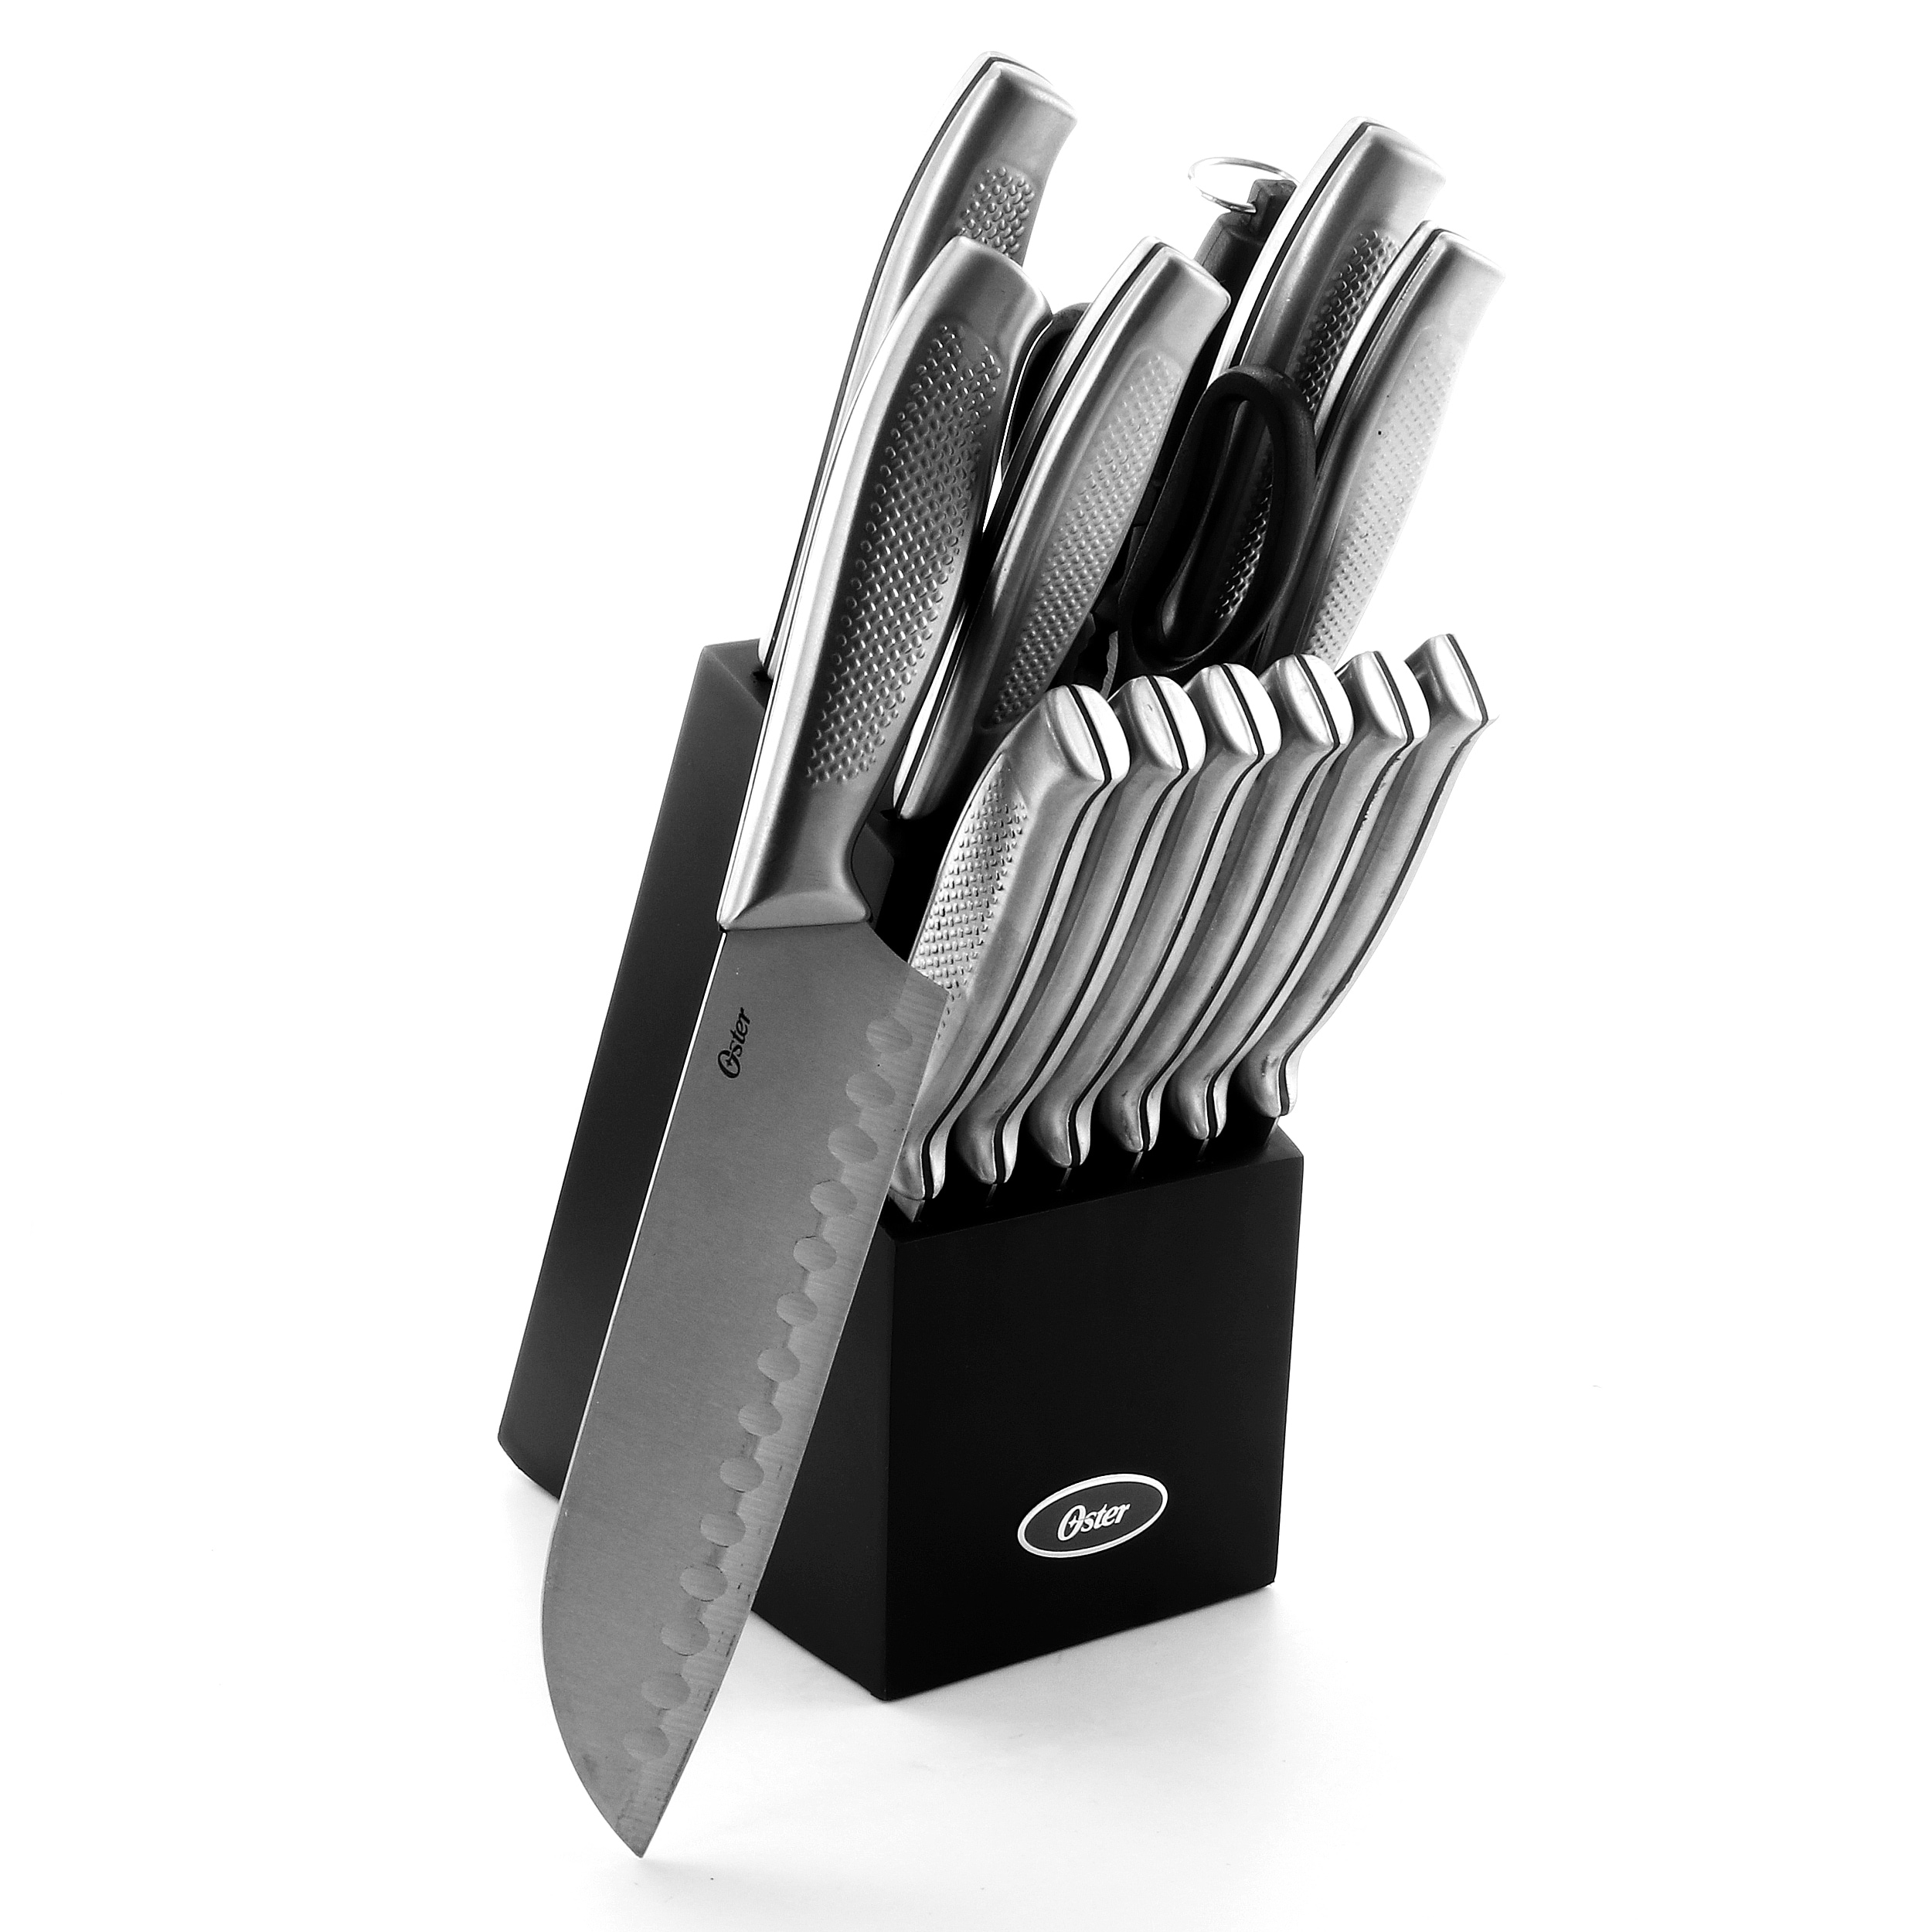 This Knife Set Comes With a Built-in Sharpener Block and Is 33% Off